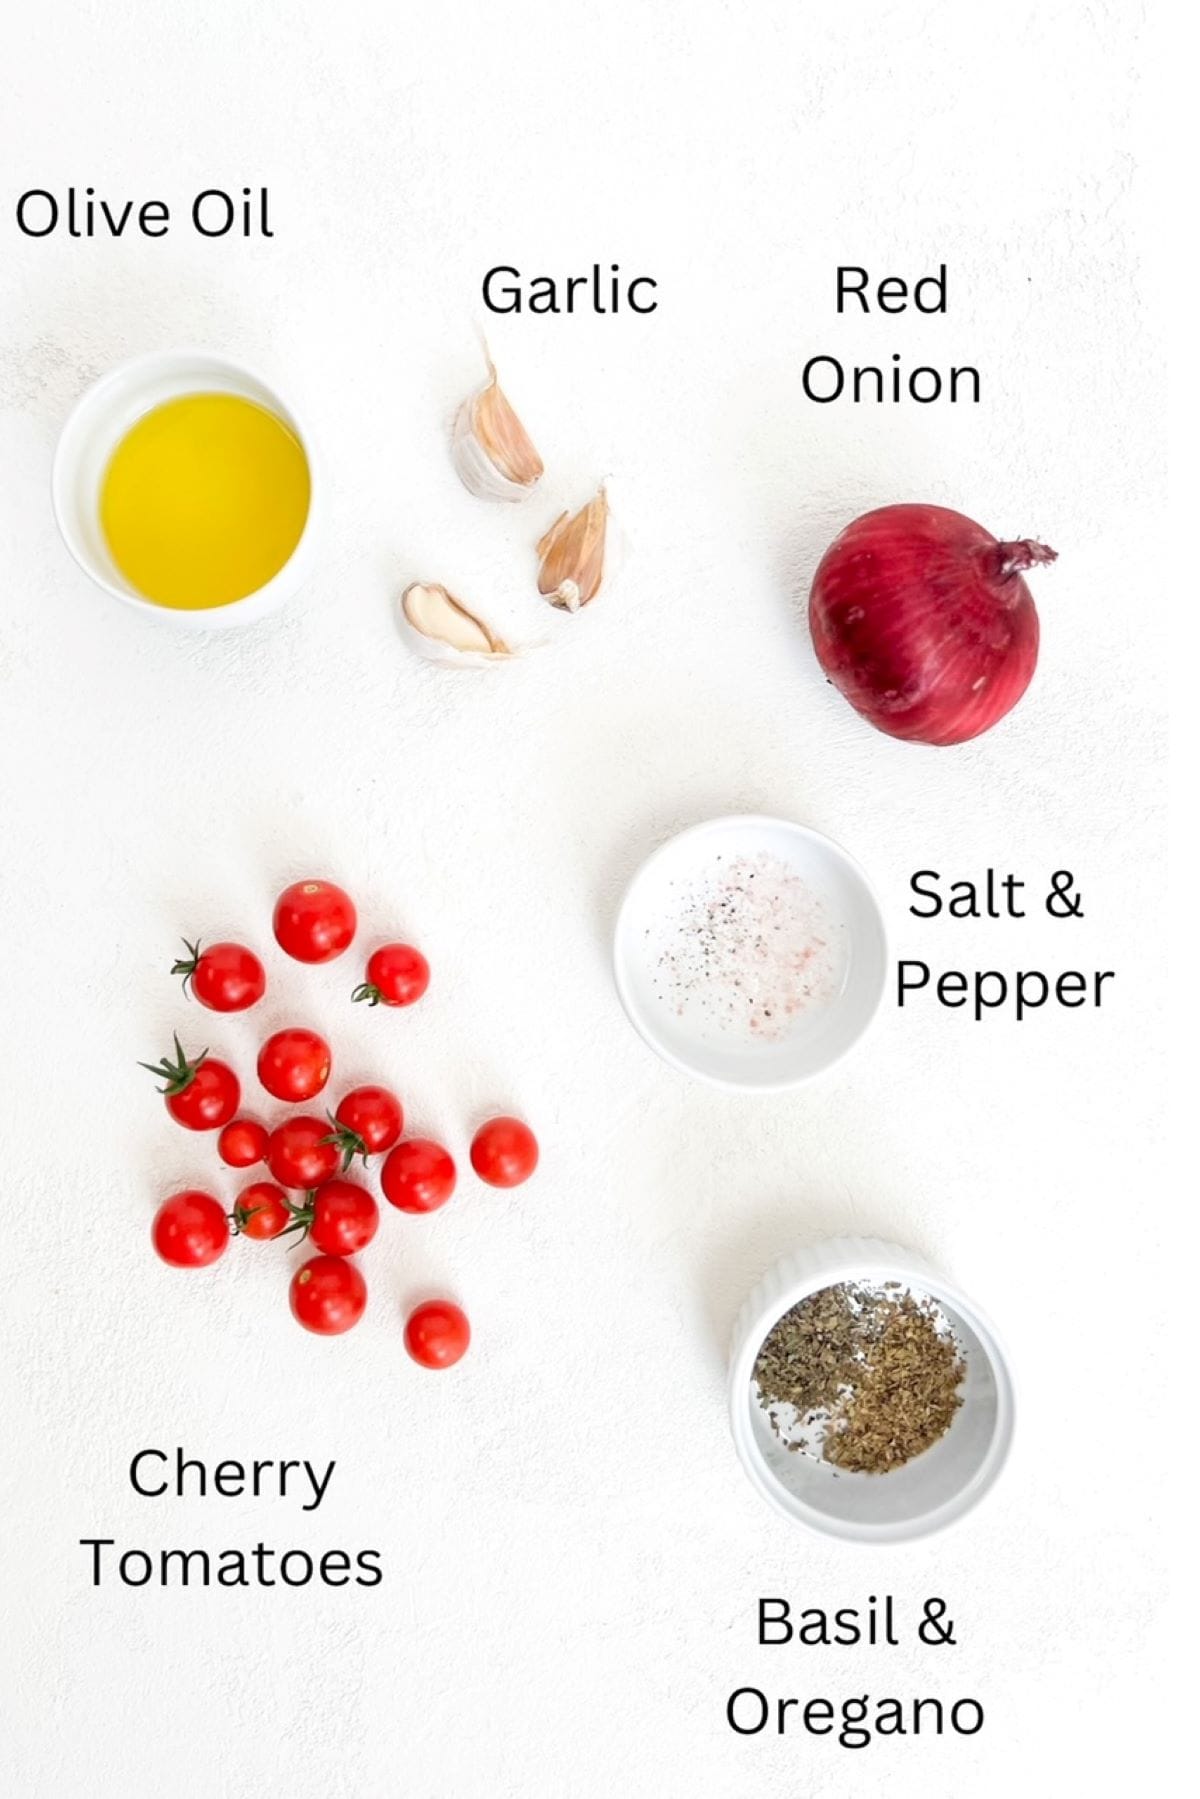 Olive oil, three garlic cloves, one red onion, cherry tomatoes, salt and pepper, basil and oregano placed separately on a white background and labeled.